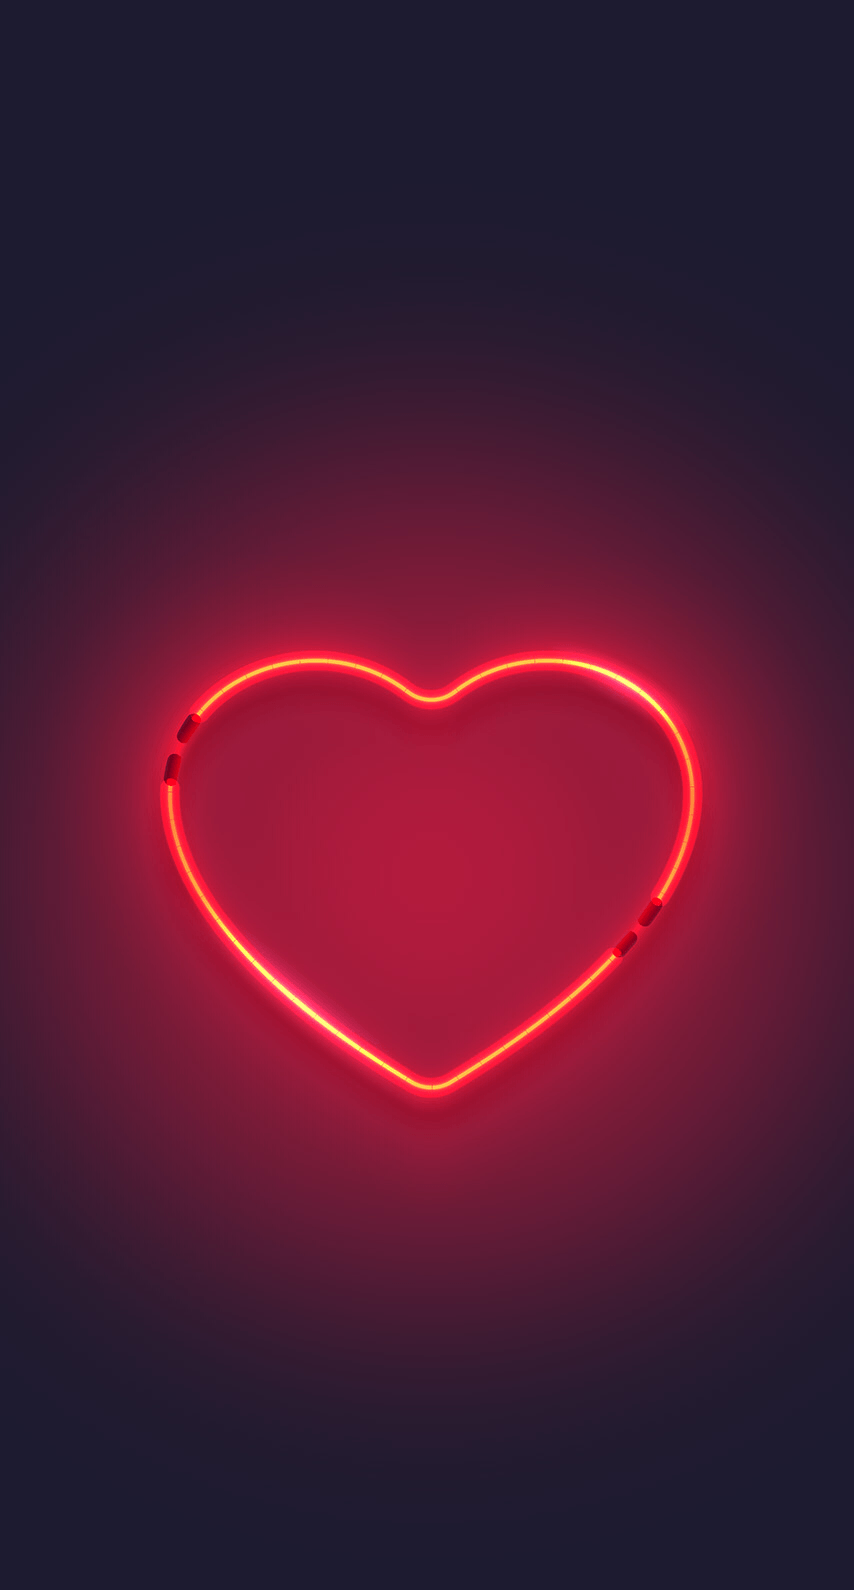 A red neon heart sign on a black background - Neon red, heart